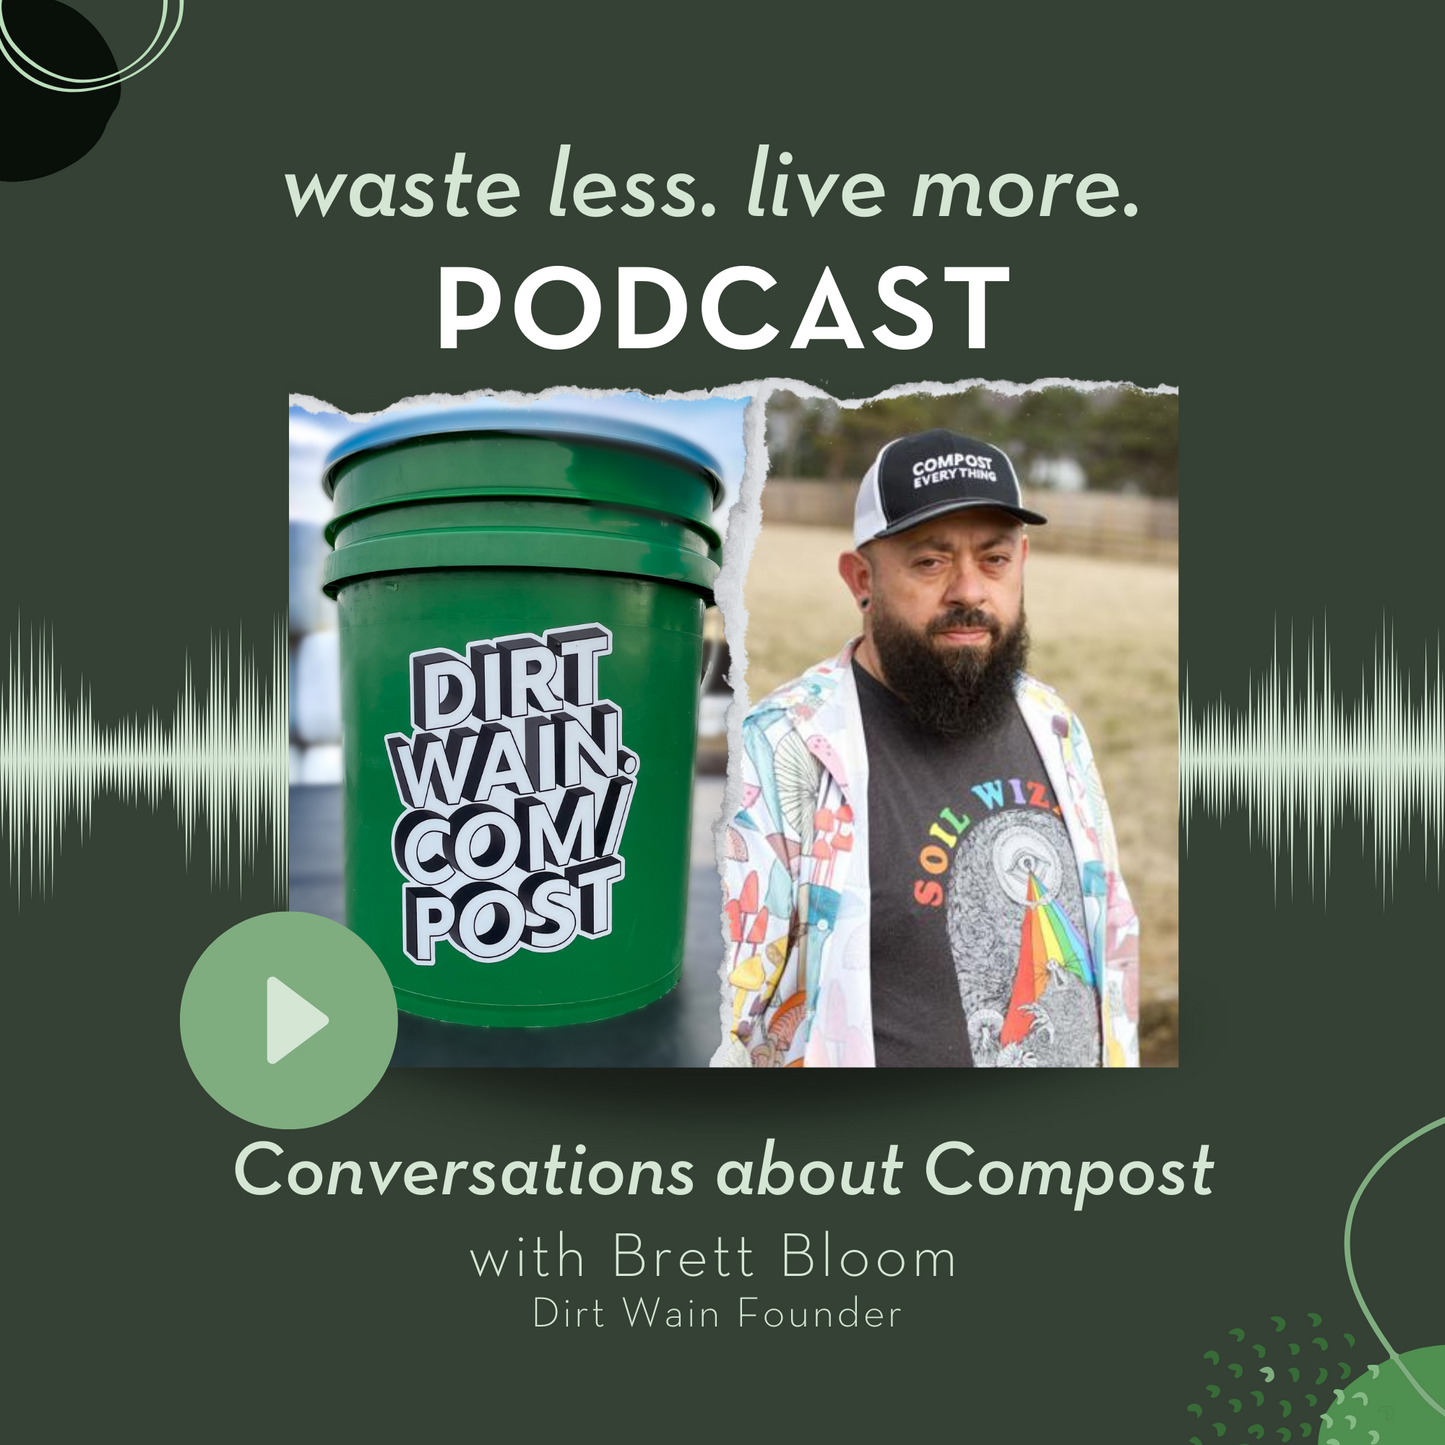 Conversations with a Composter